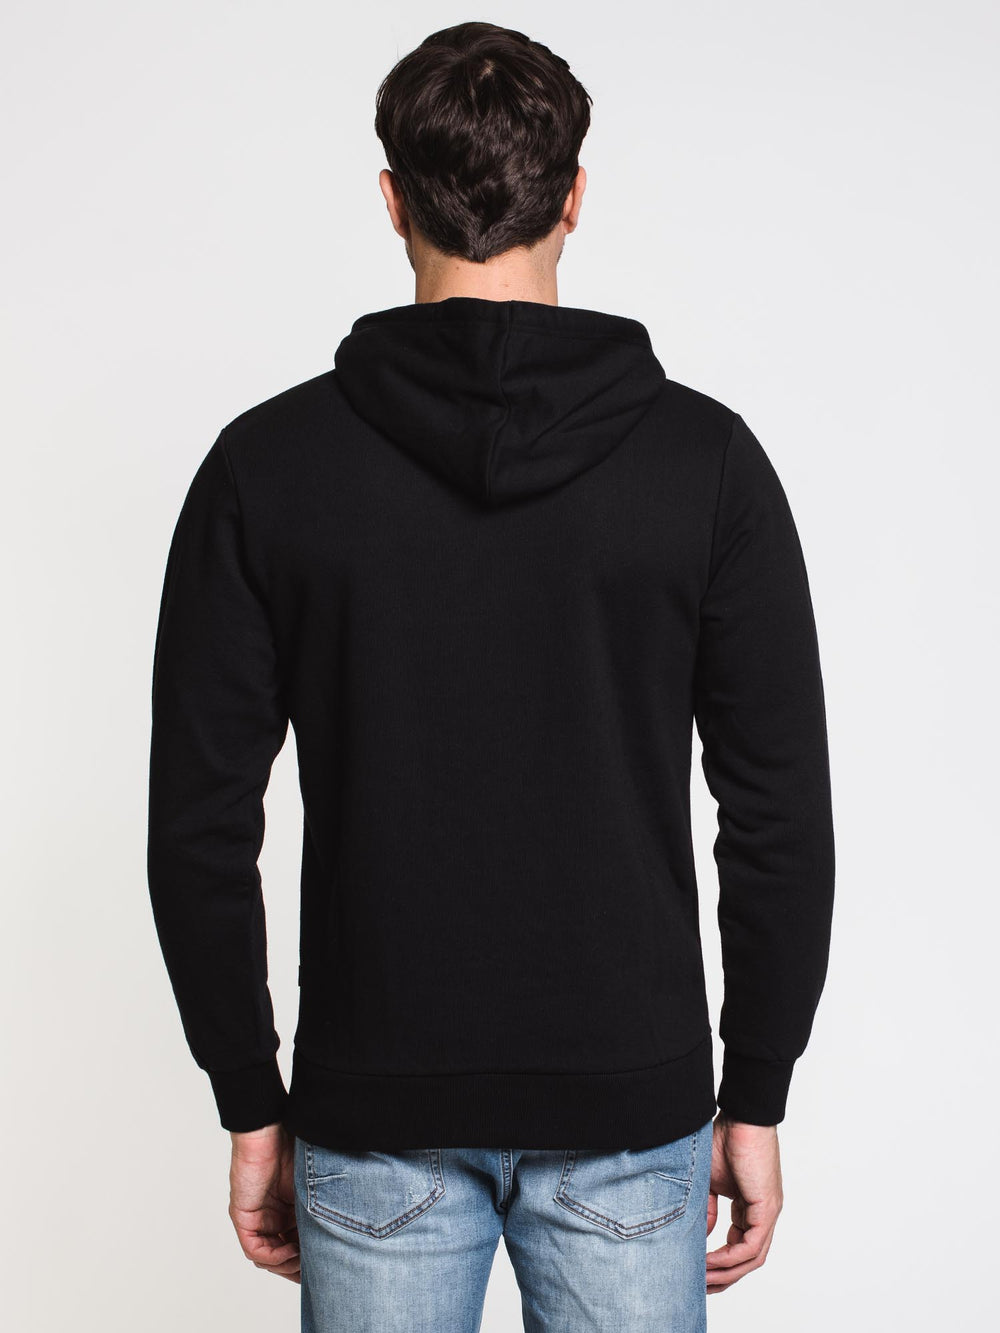 CROOKS & CASTLES RED BOX C&C PULLOVER HOODIE  - CLEARANCE